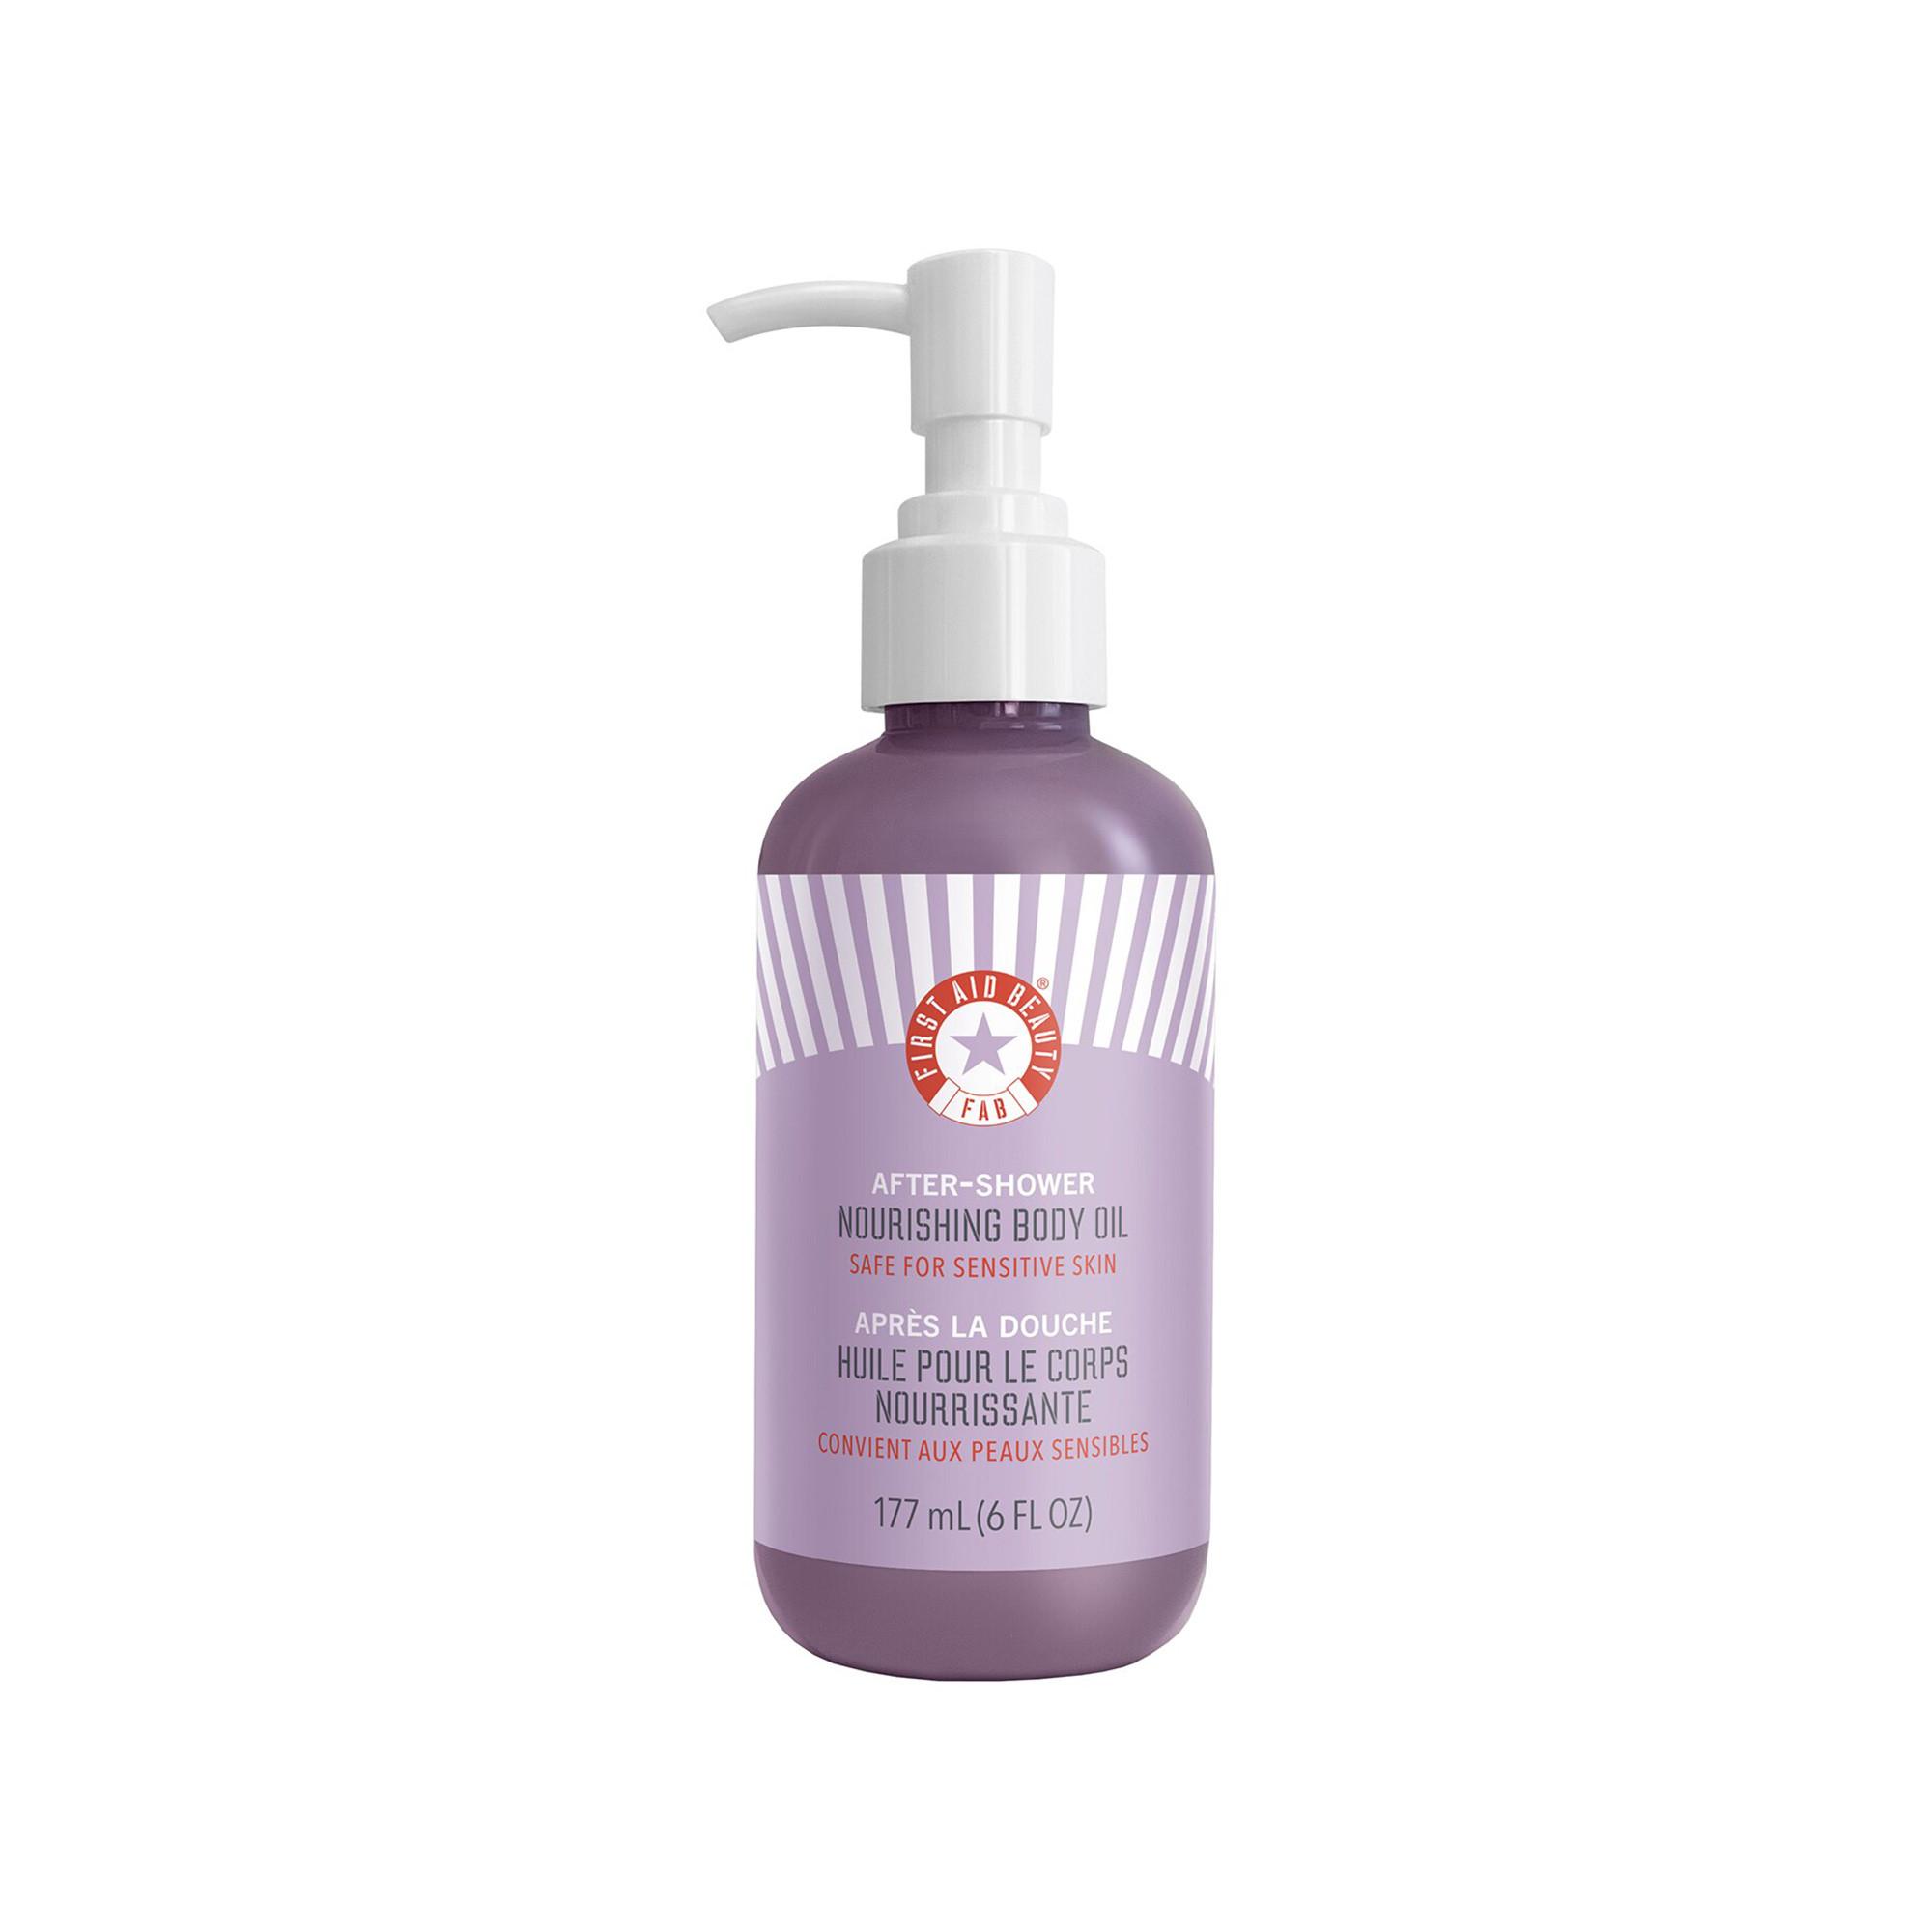 FIRST AID BEAUTY  After-shower nourishing body oil - Huile pour le corps nourrissante 